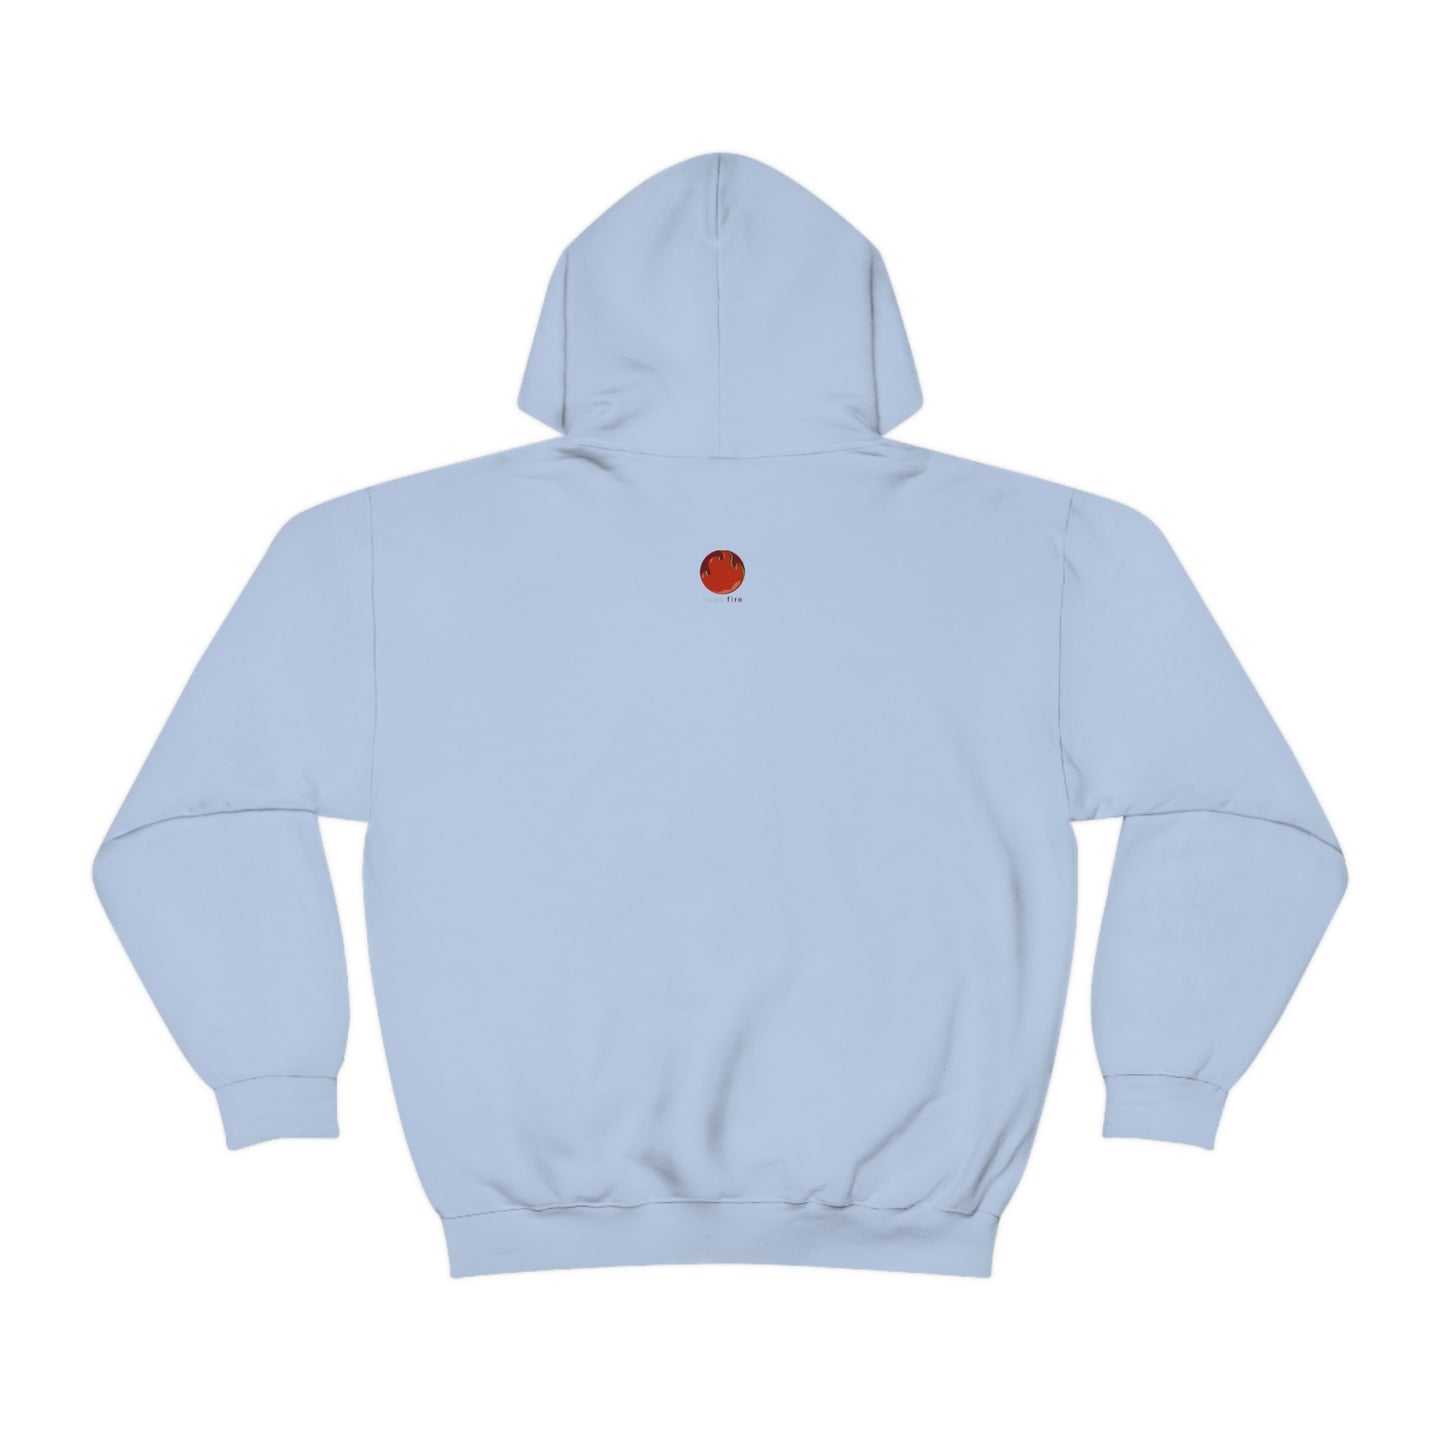 Balls Out Hoodie